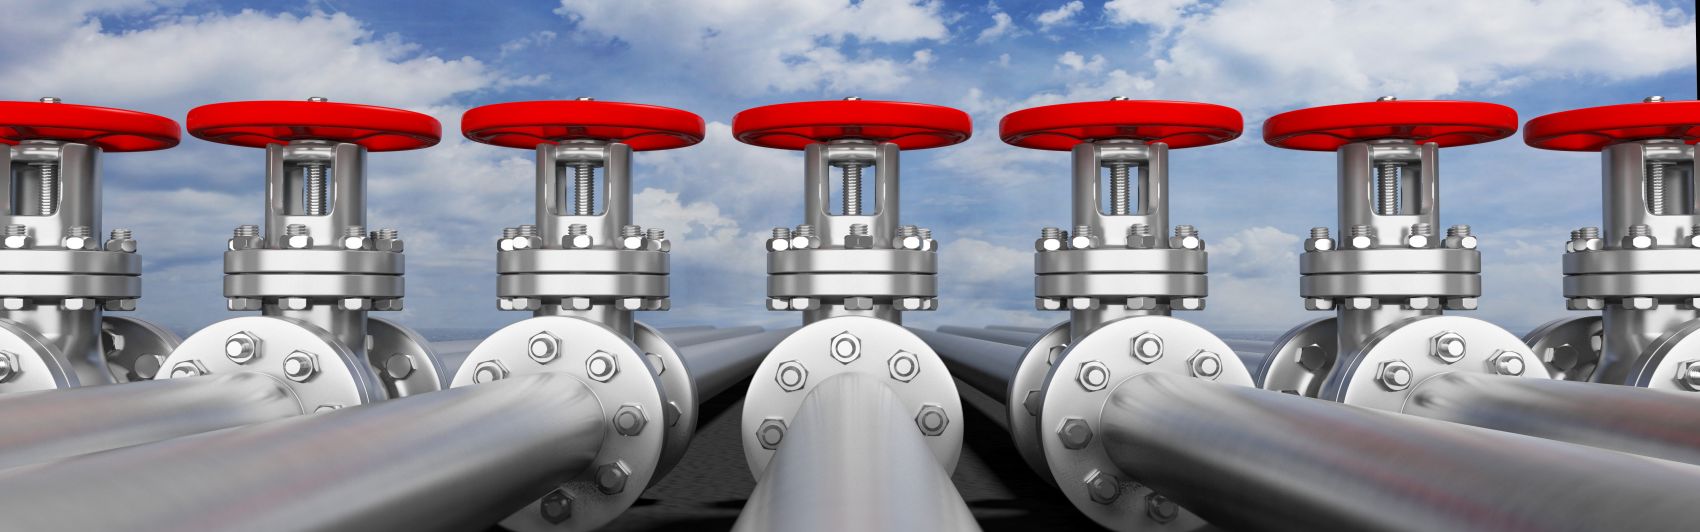 "valves, pipelines, pipes, banner, oil, industry, plant, outdoors, sky, nature, blue, system, 3d, gas, fuel, clouds, horizontal, control, faucet, engineering, water, row, equipment, steel, industrial, petroleum, illustration, metal, business, construction